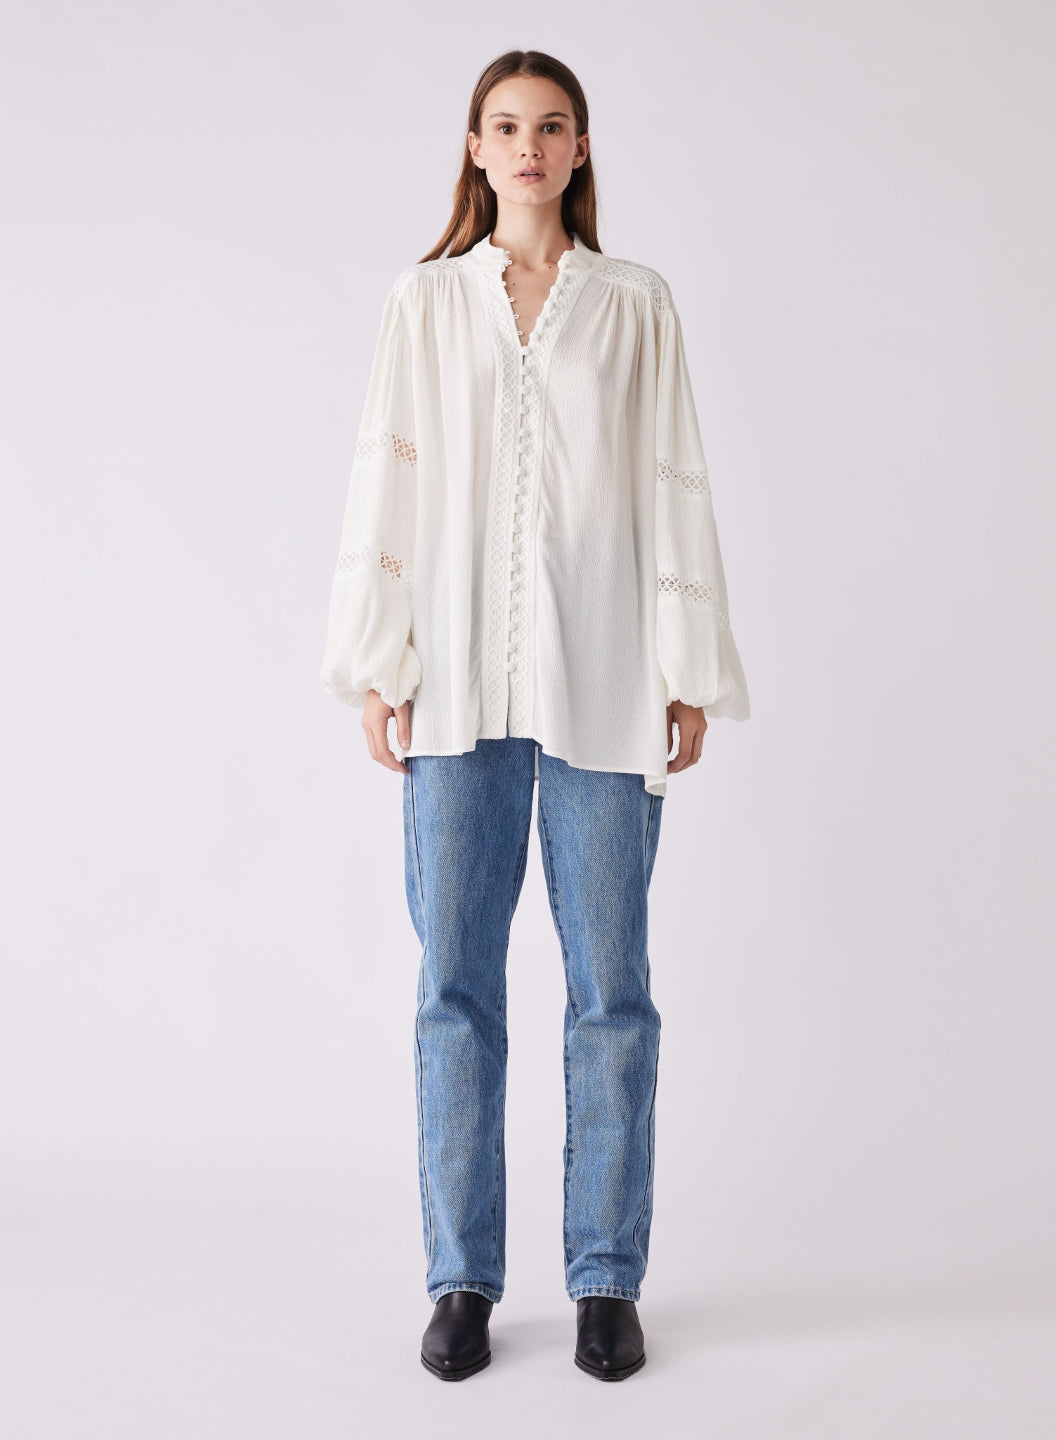 The Harp Blouse from Esmaee